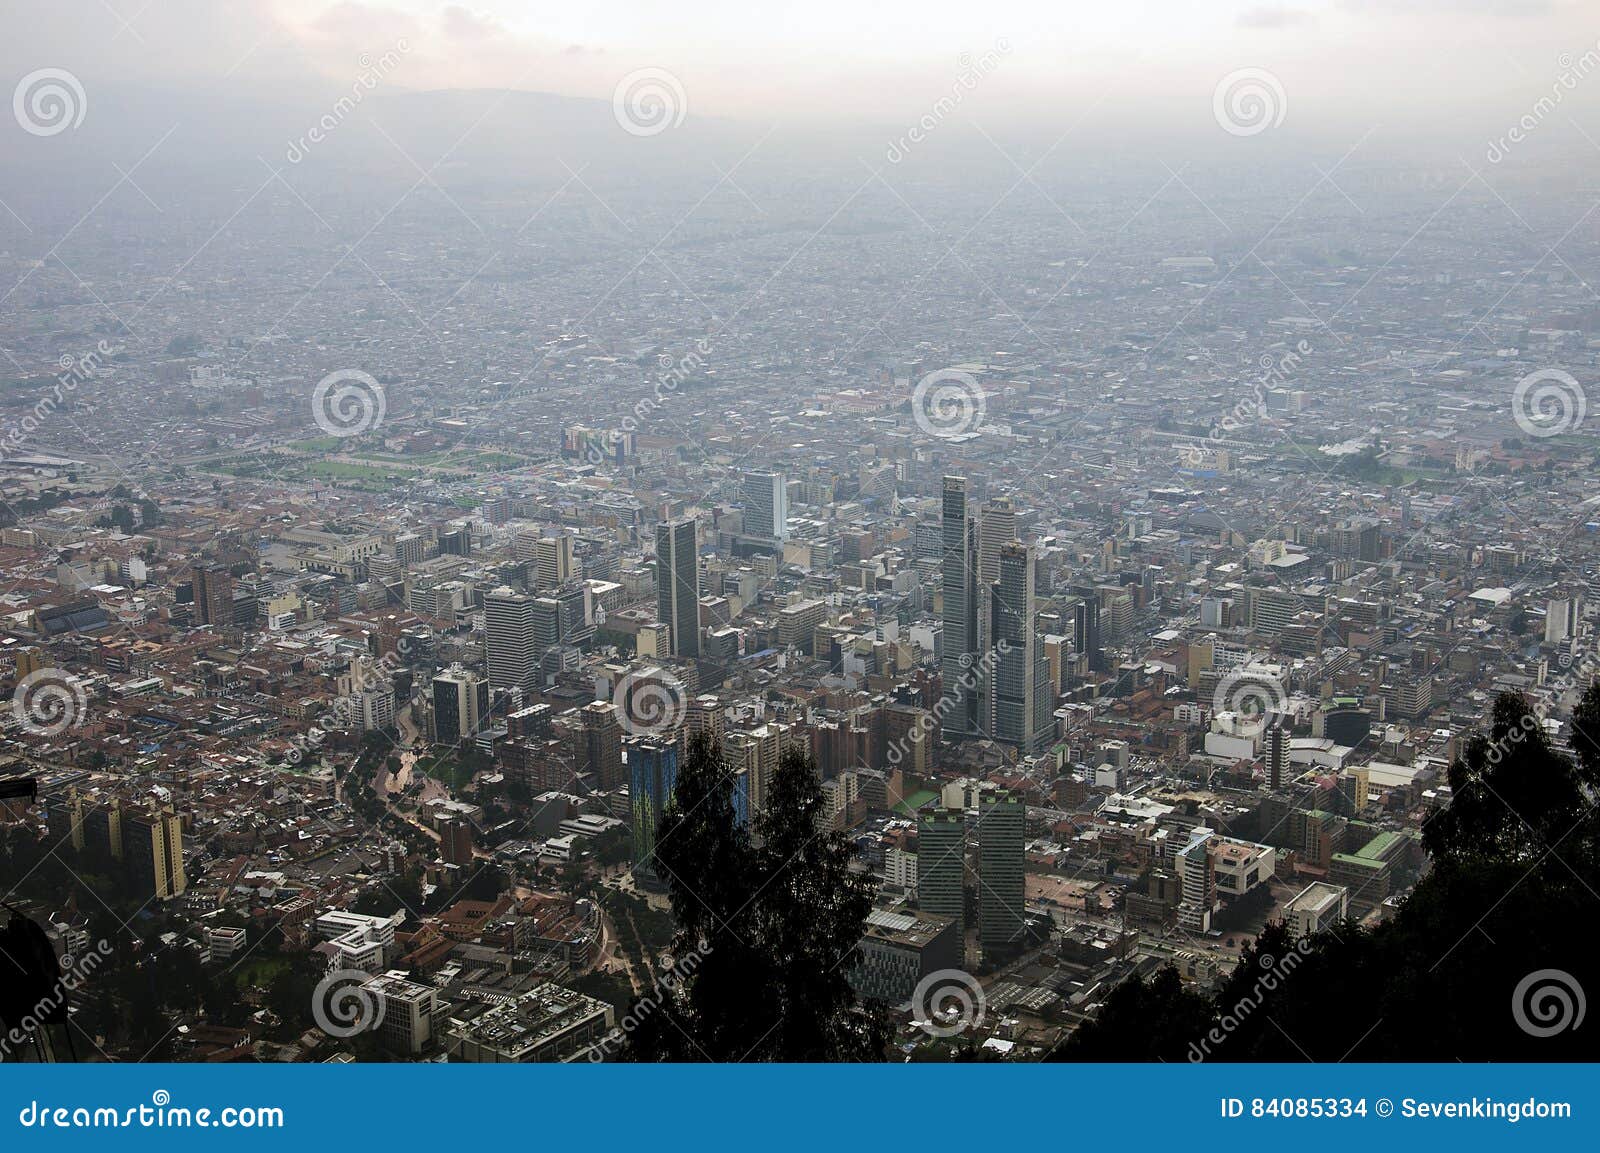 view from hill of monserrate, bogot, colombia